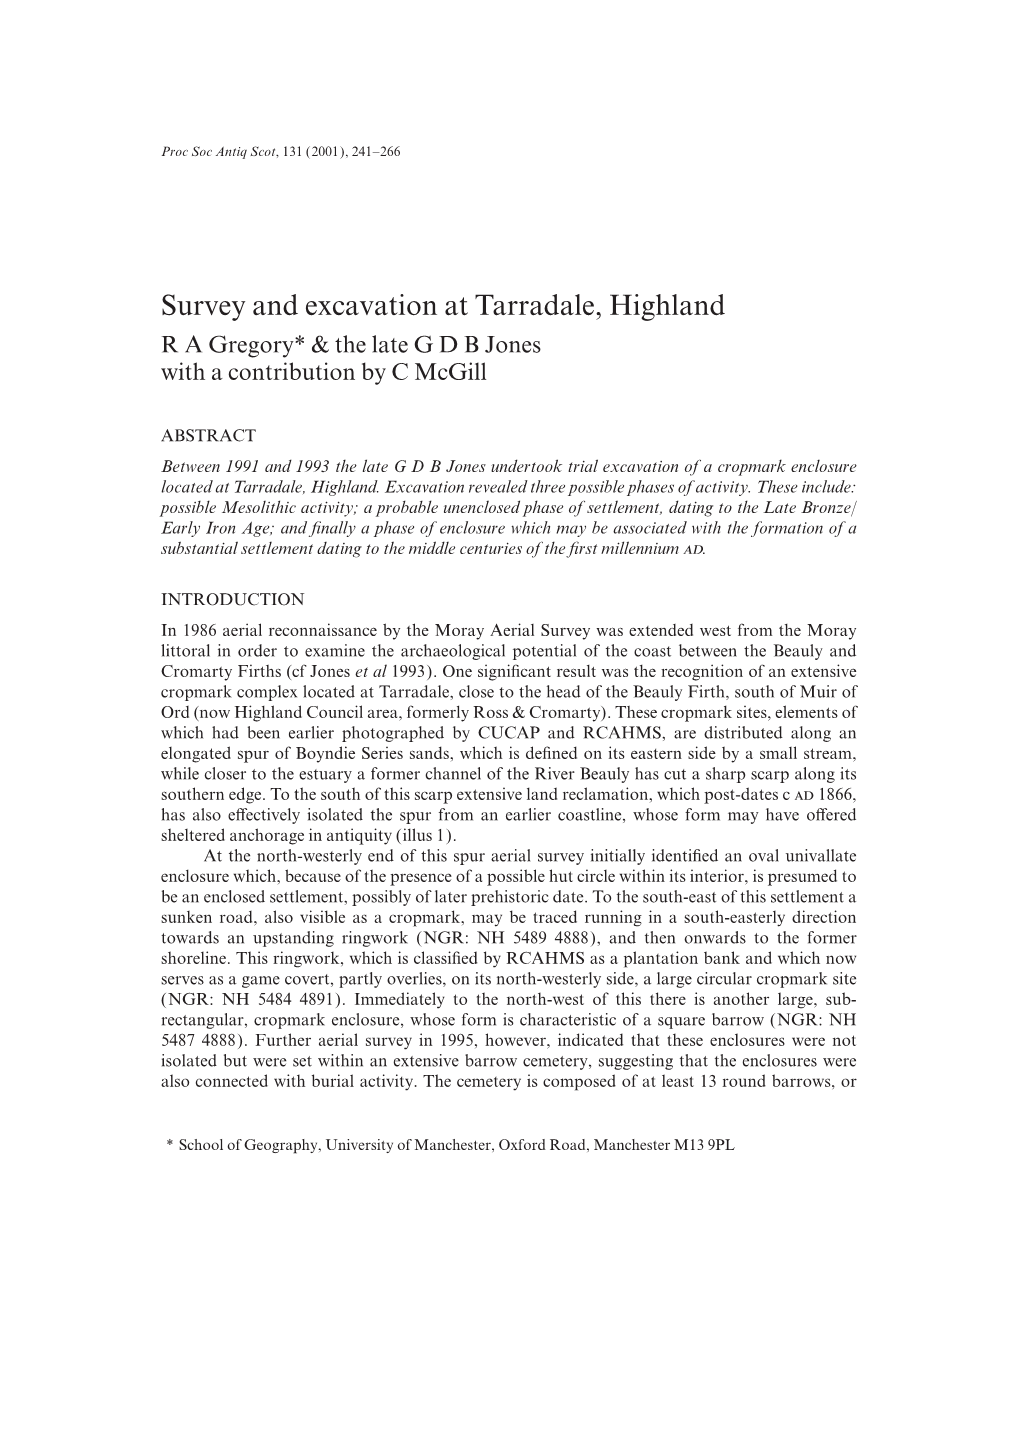 Survey and Excavation at Tarradale, Highland R a Gregory* & the Lategdbjones with a Contribution by C Mcgill